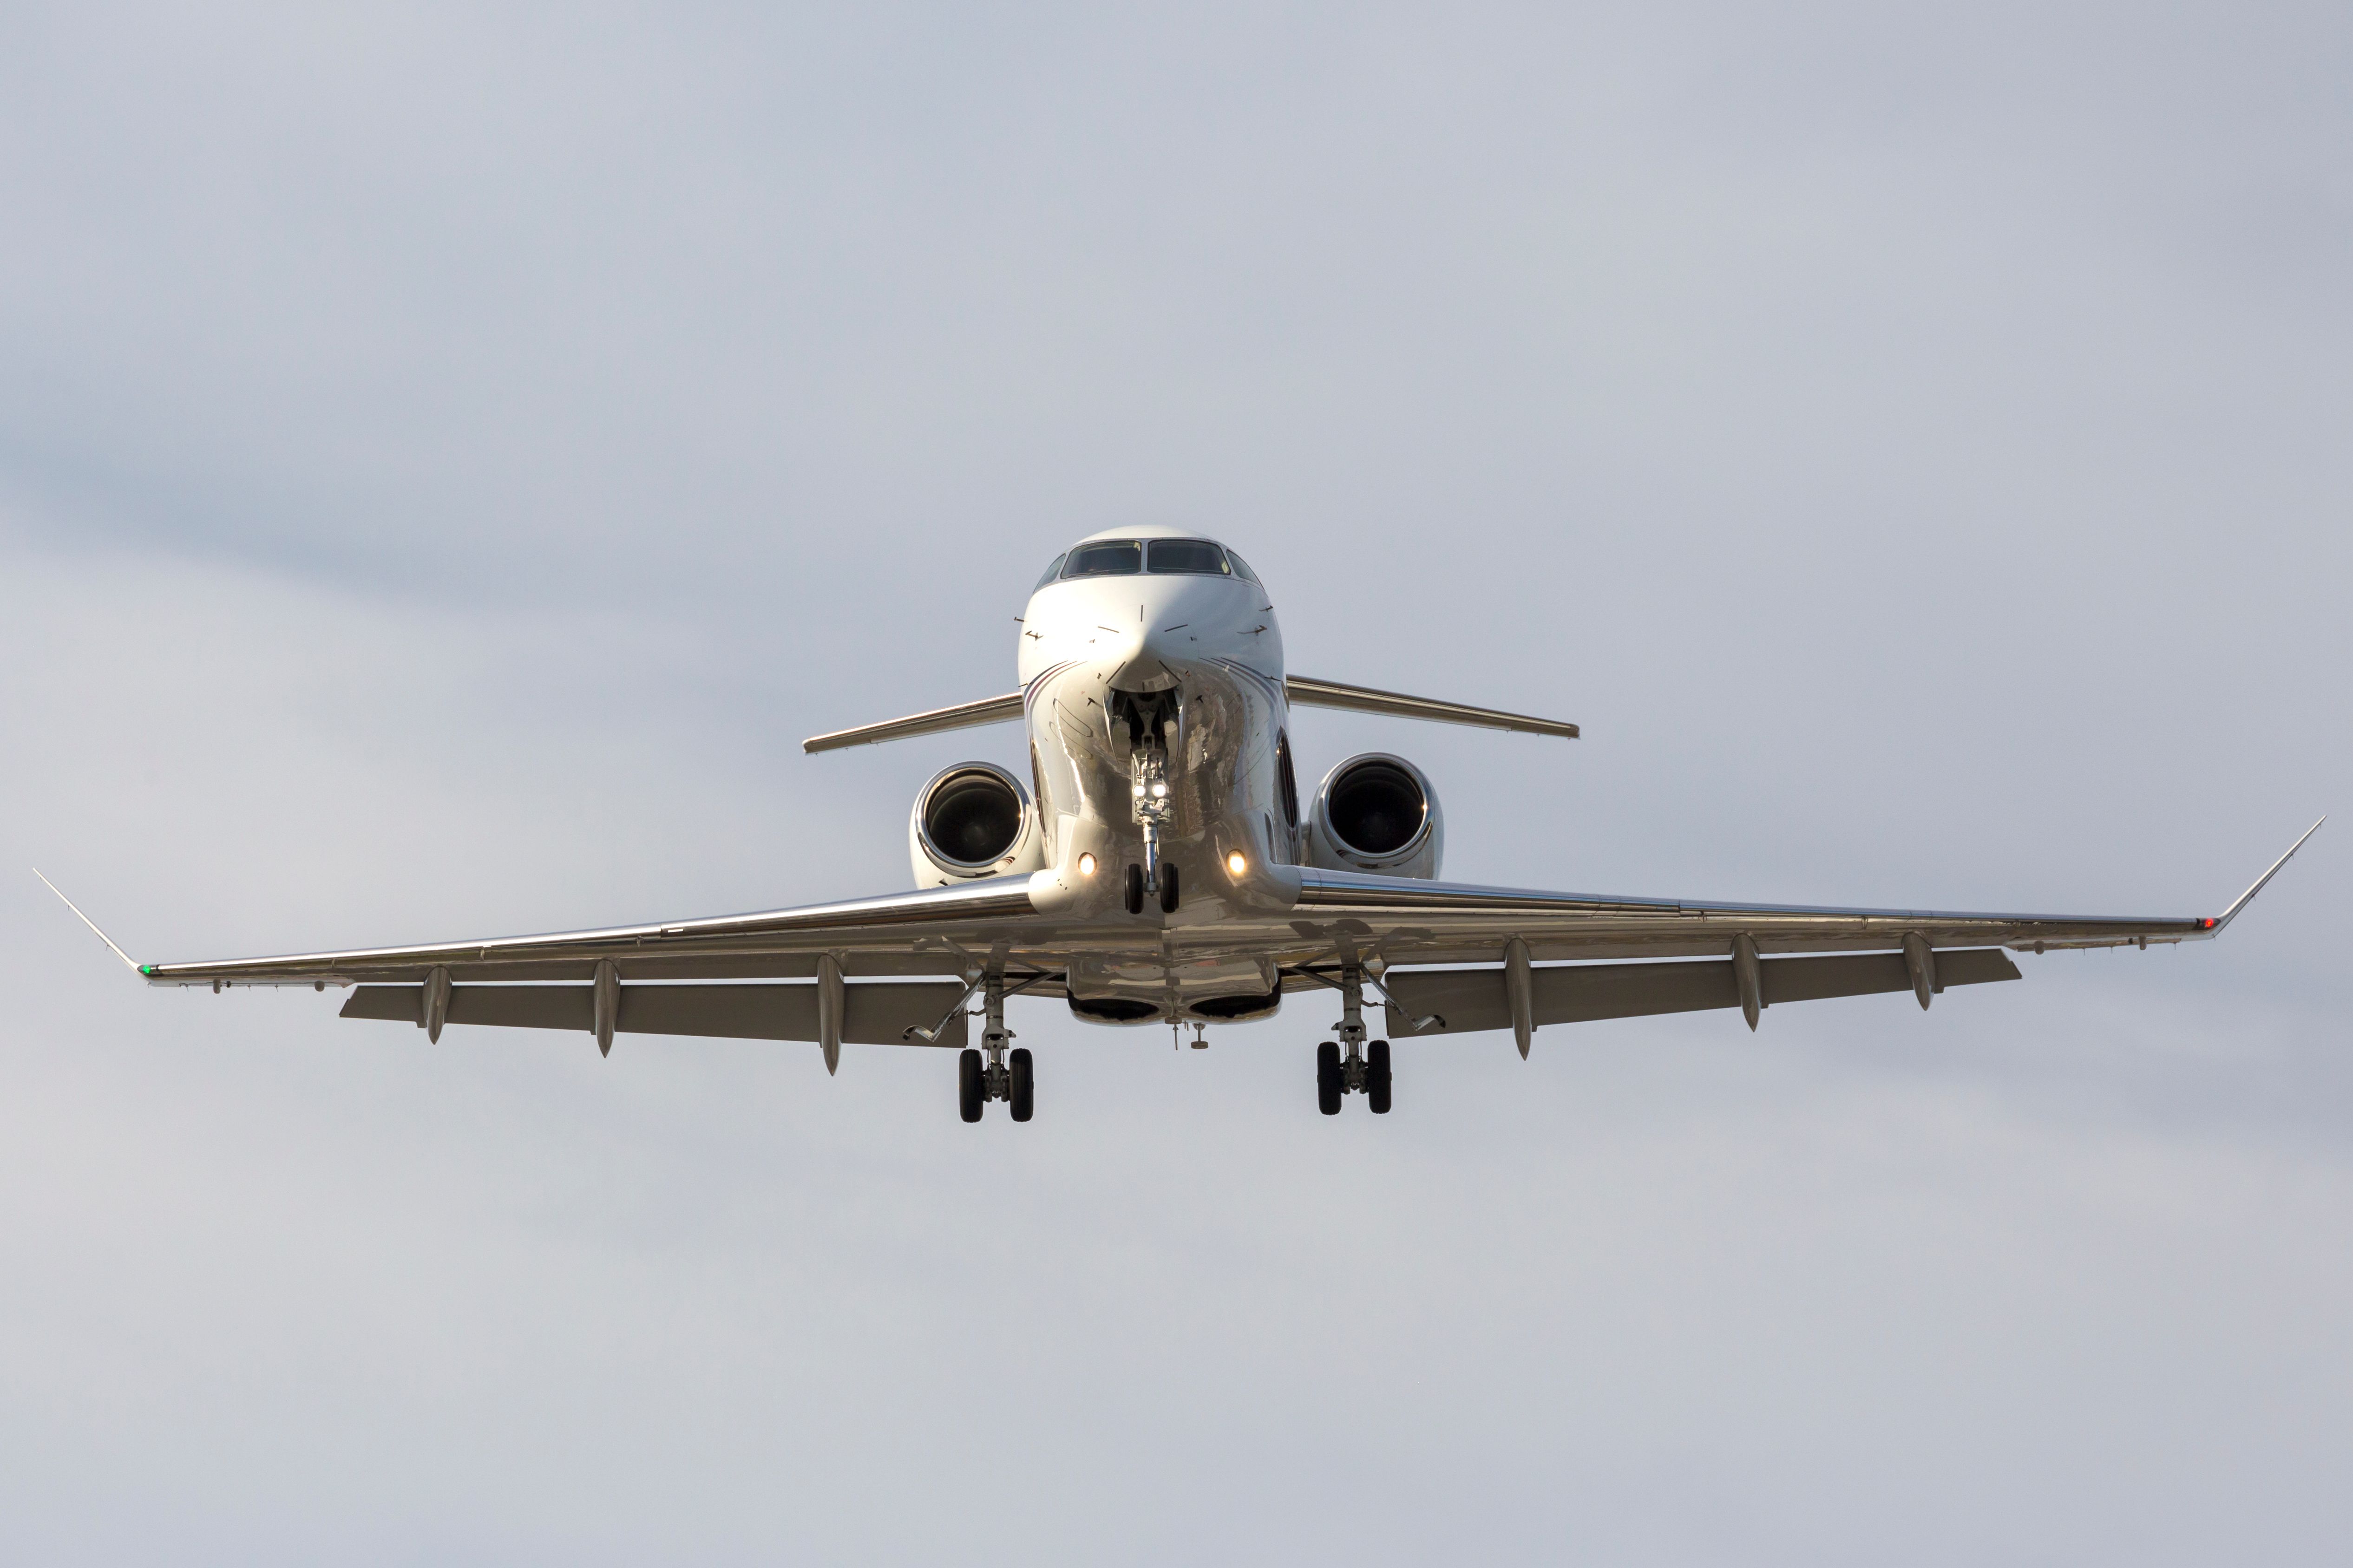 A Front Profile View of a Private Jet with its gear down.